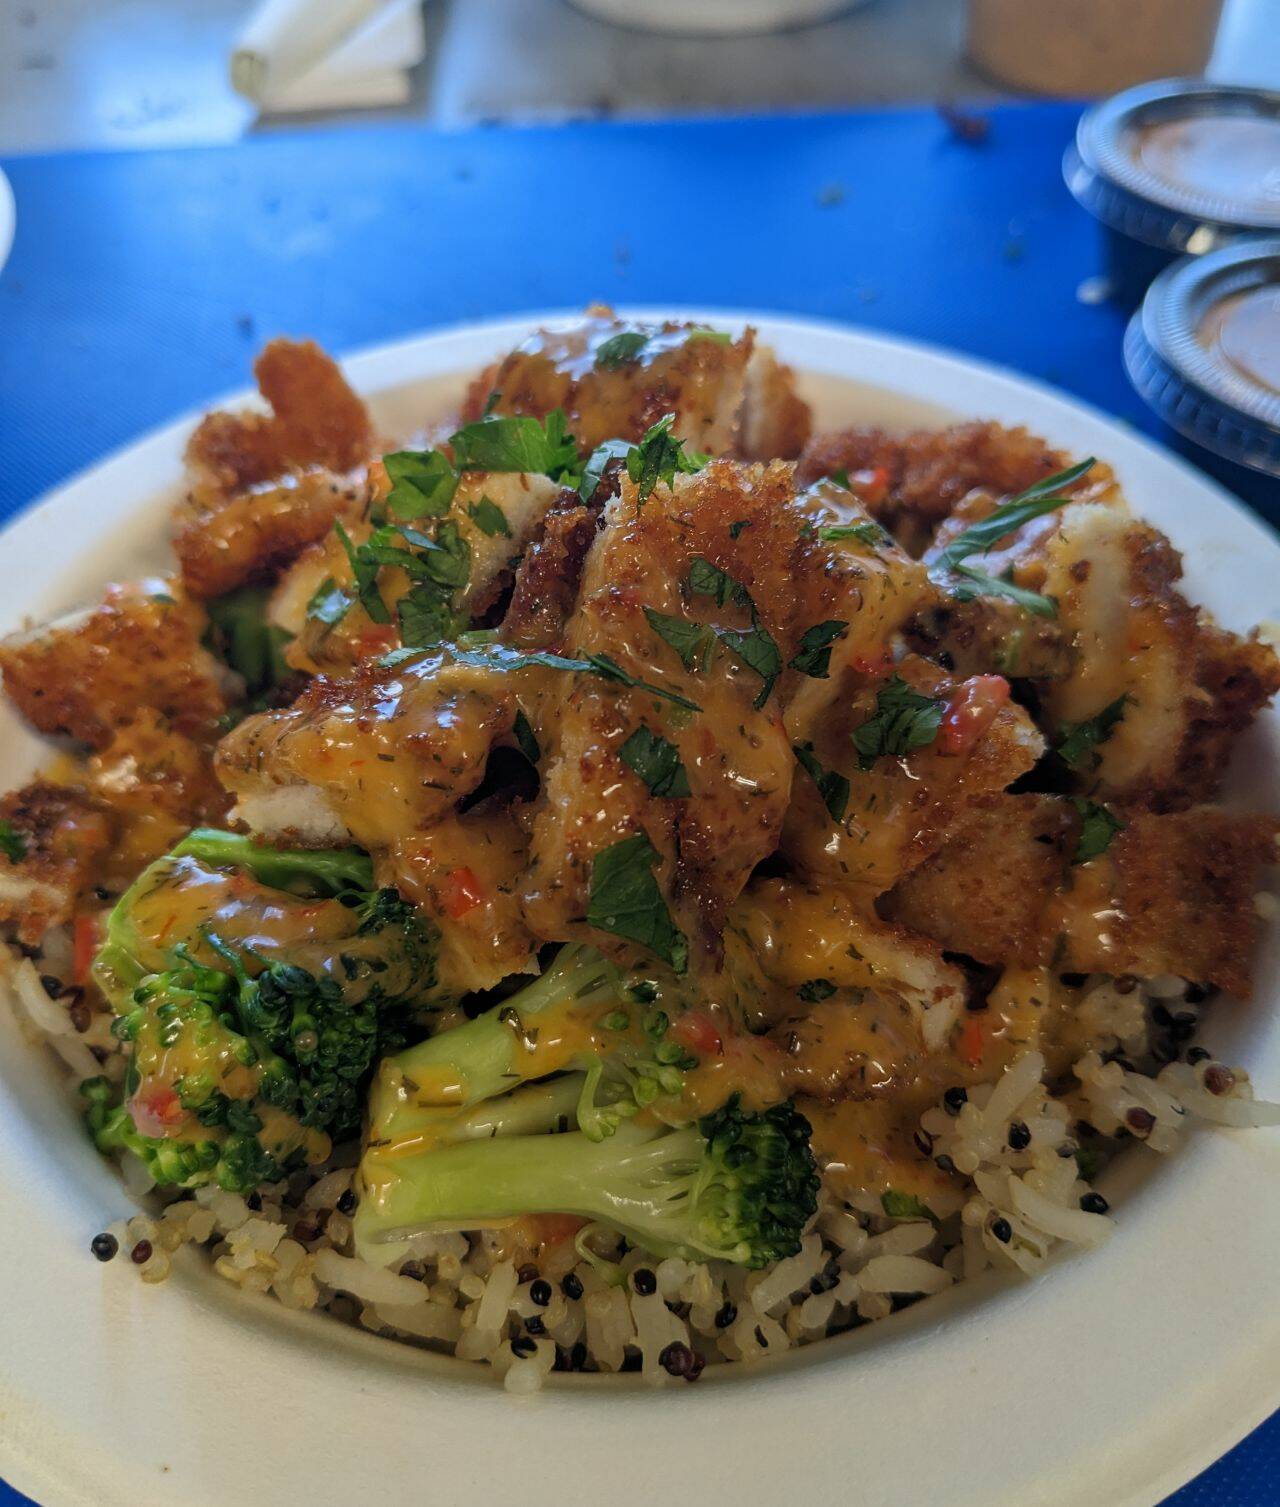 The Top Secret Chicken Bowl is one of the dishes She's Got Bowls Food Truck will be serving at the Fisherman's Village Music Festival. (Photo provided)